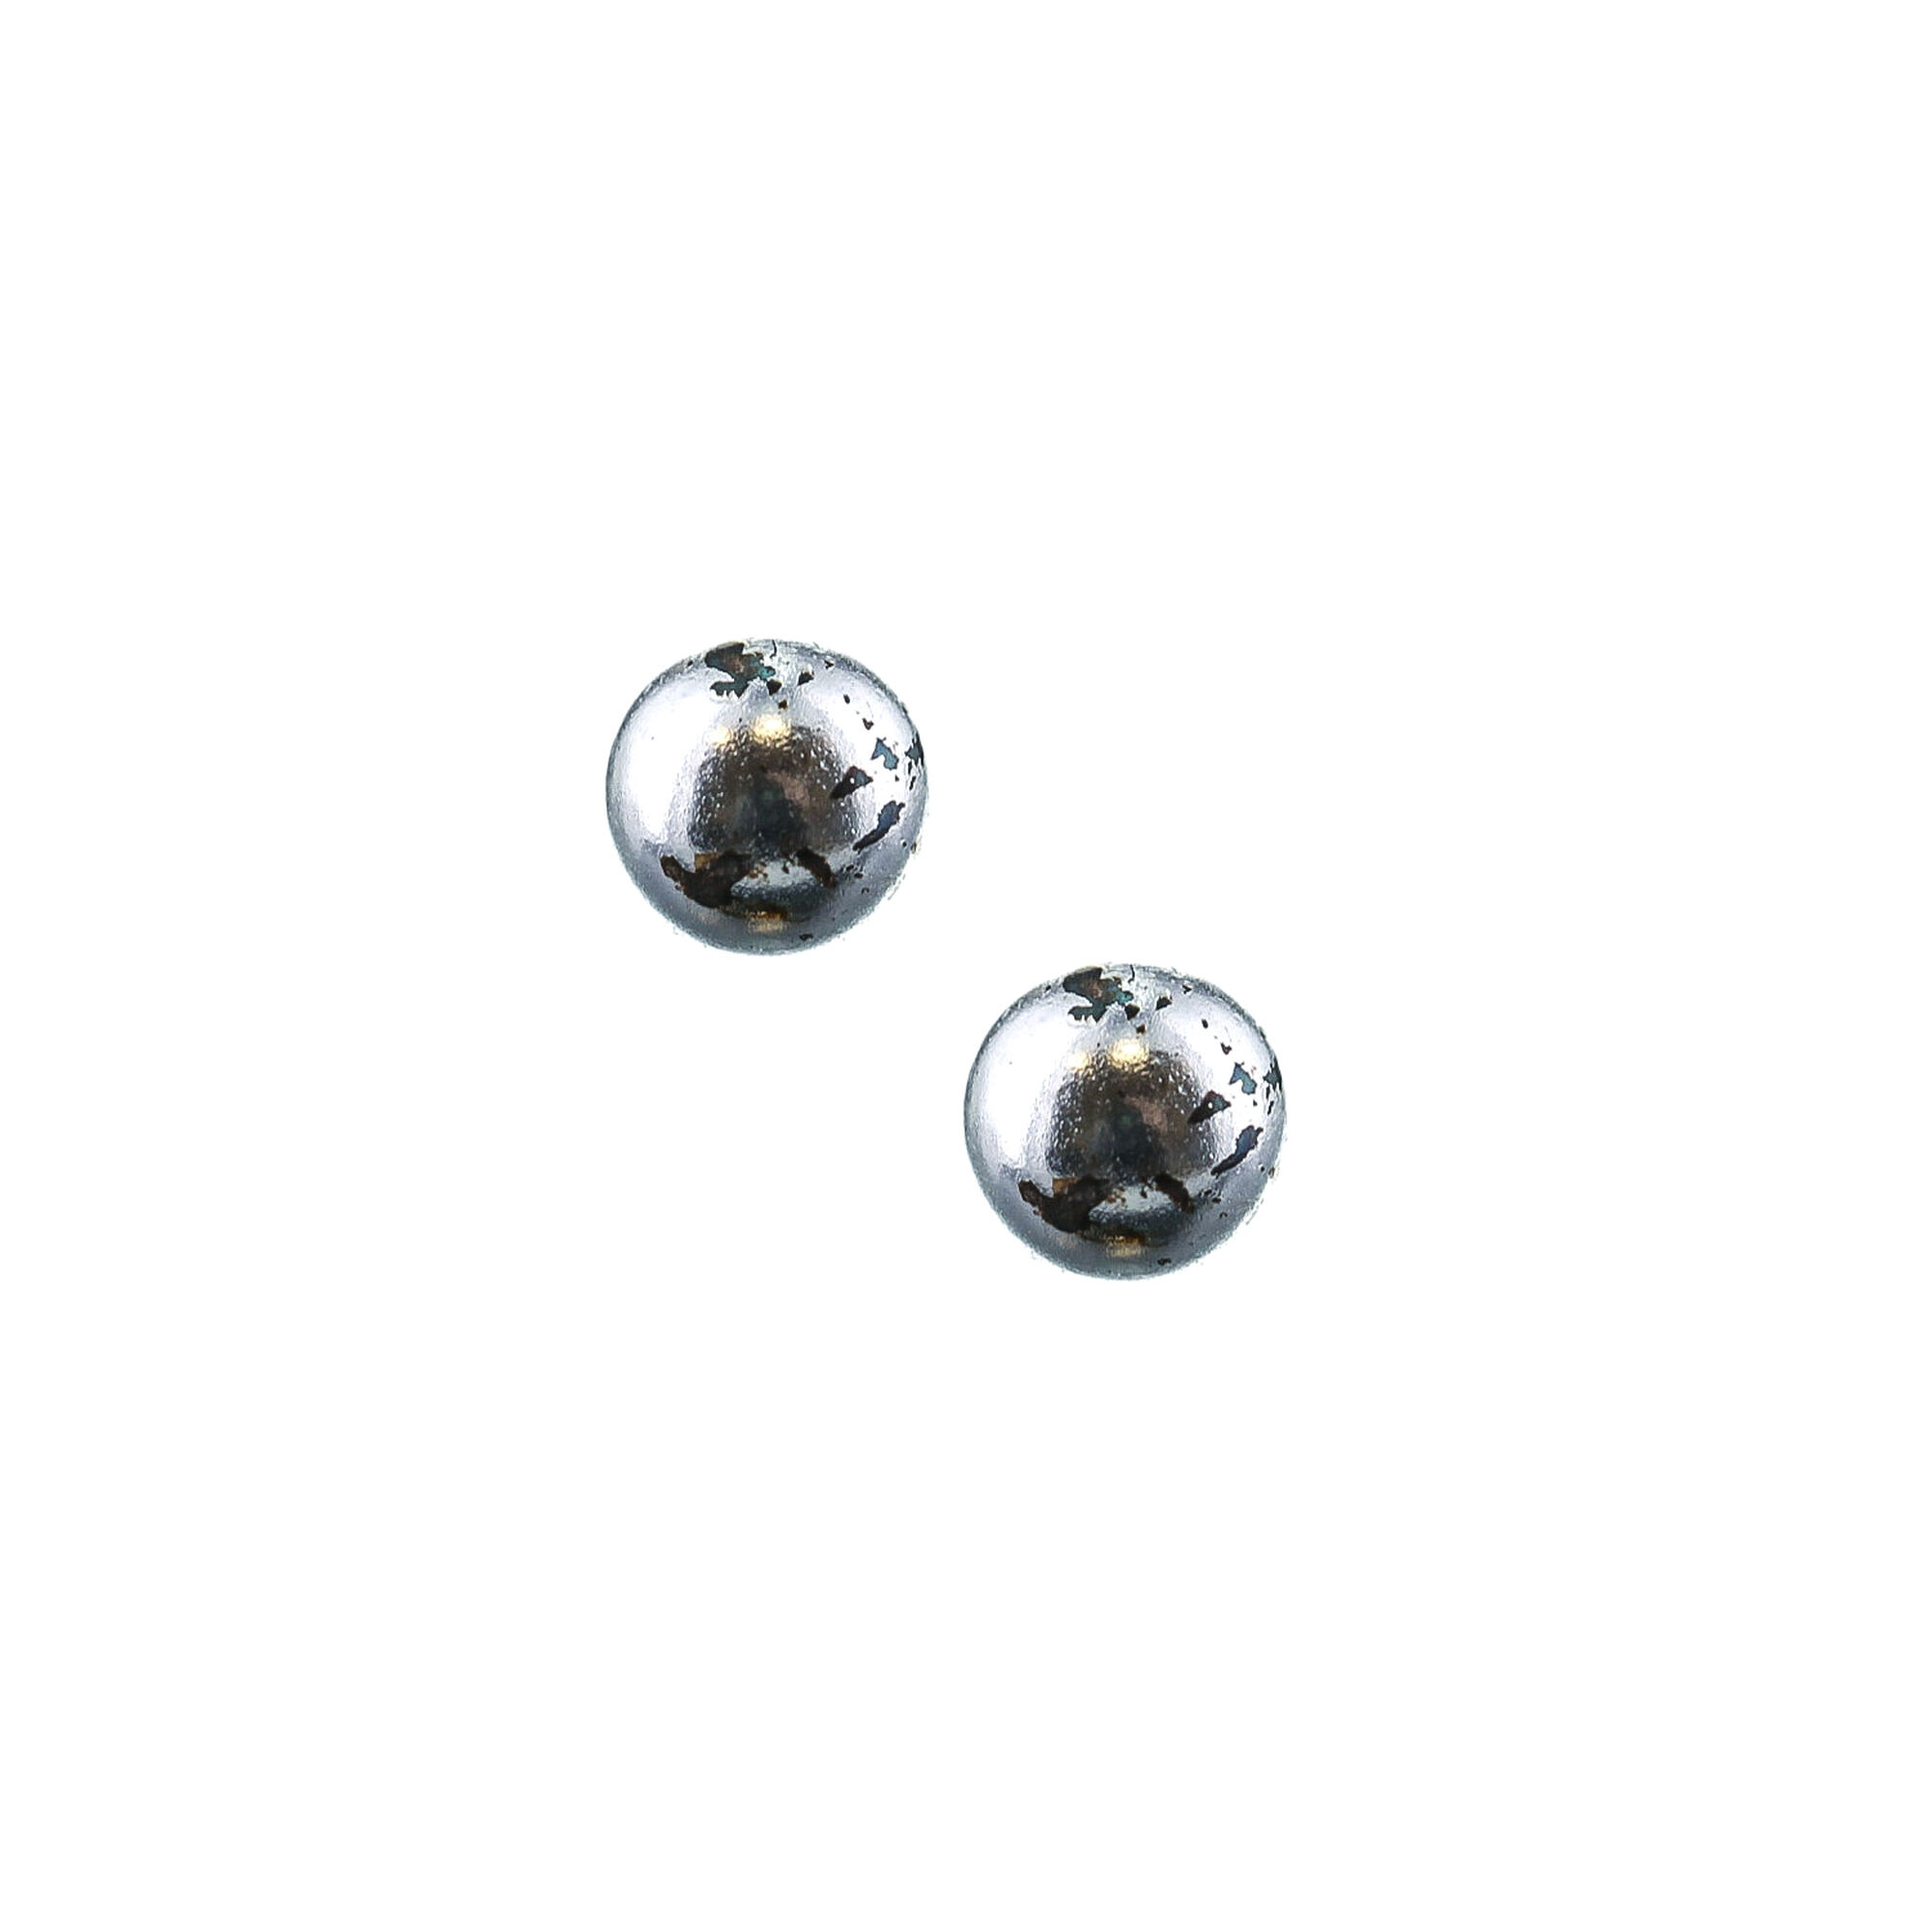 View Claires 4MM Ball Stud Earrings Silver information